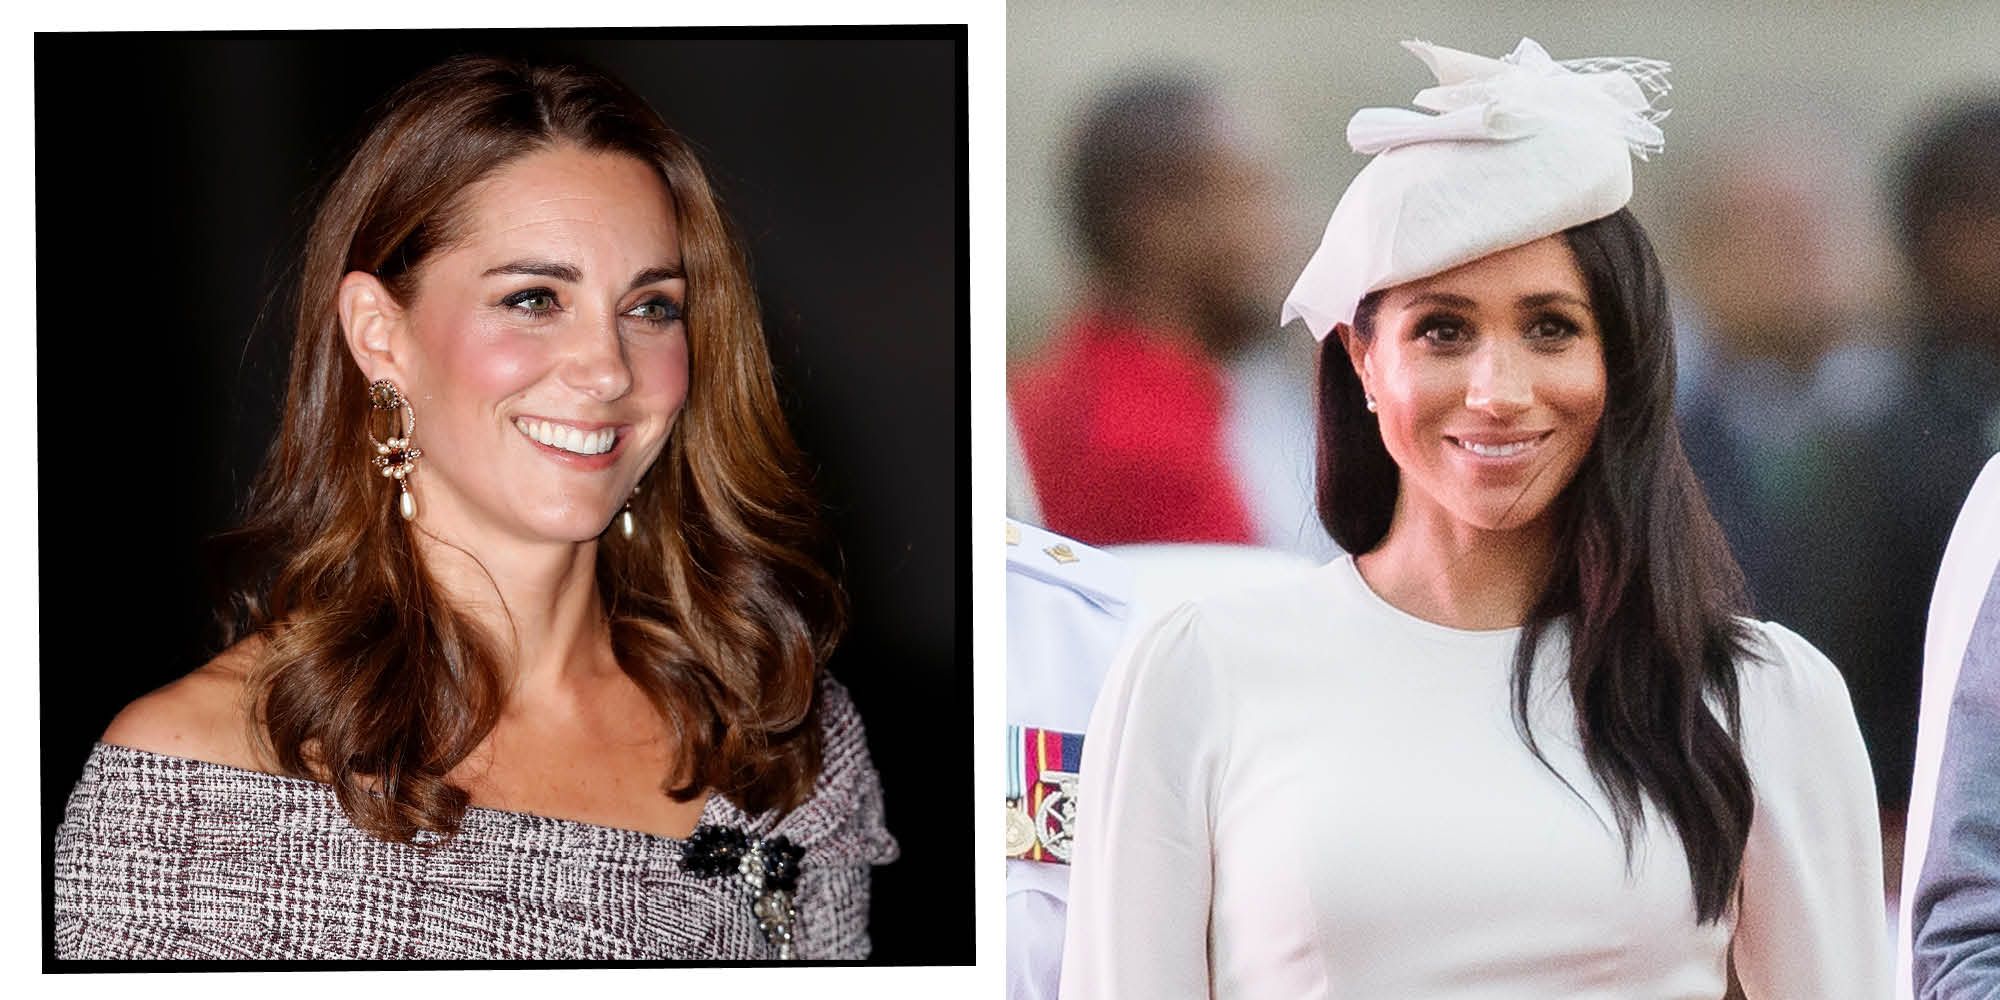 Meghan Markle and Kate Middleton Twin in Polka Dots